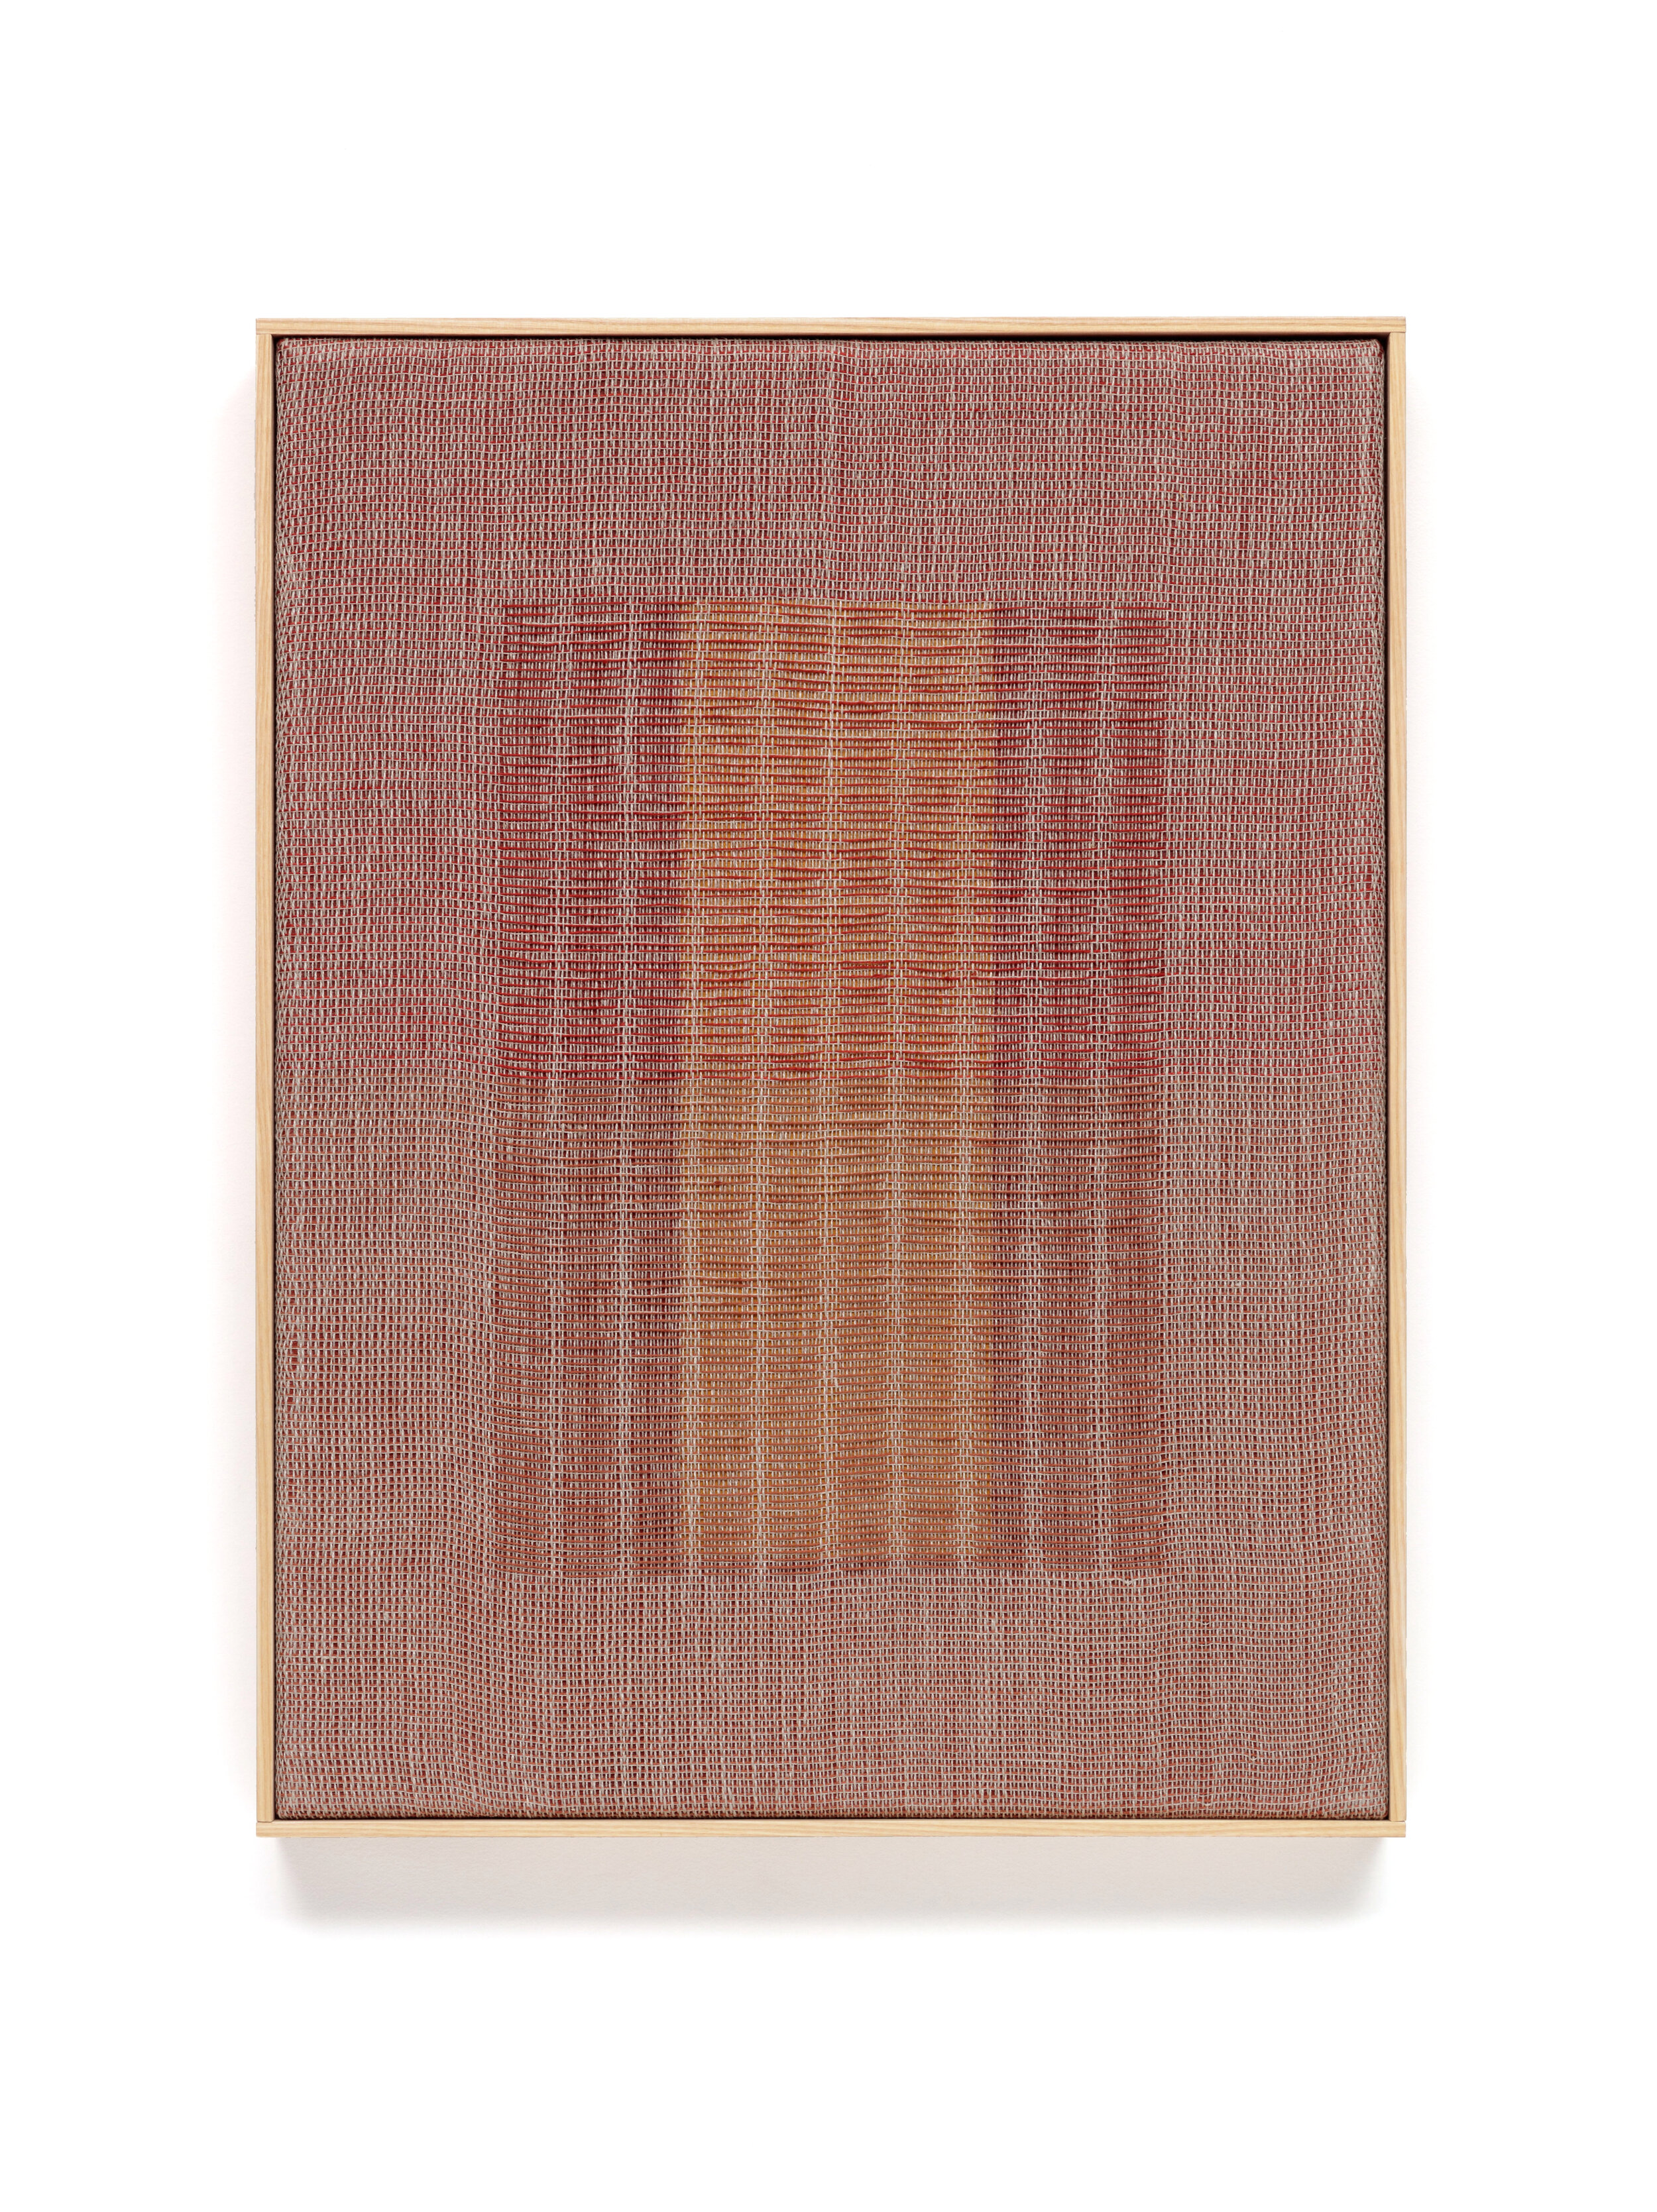 Madder Red Dash / 18” x 24” /2020 / linen, natural dyes, acrylic